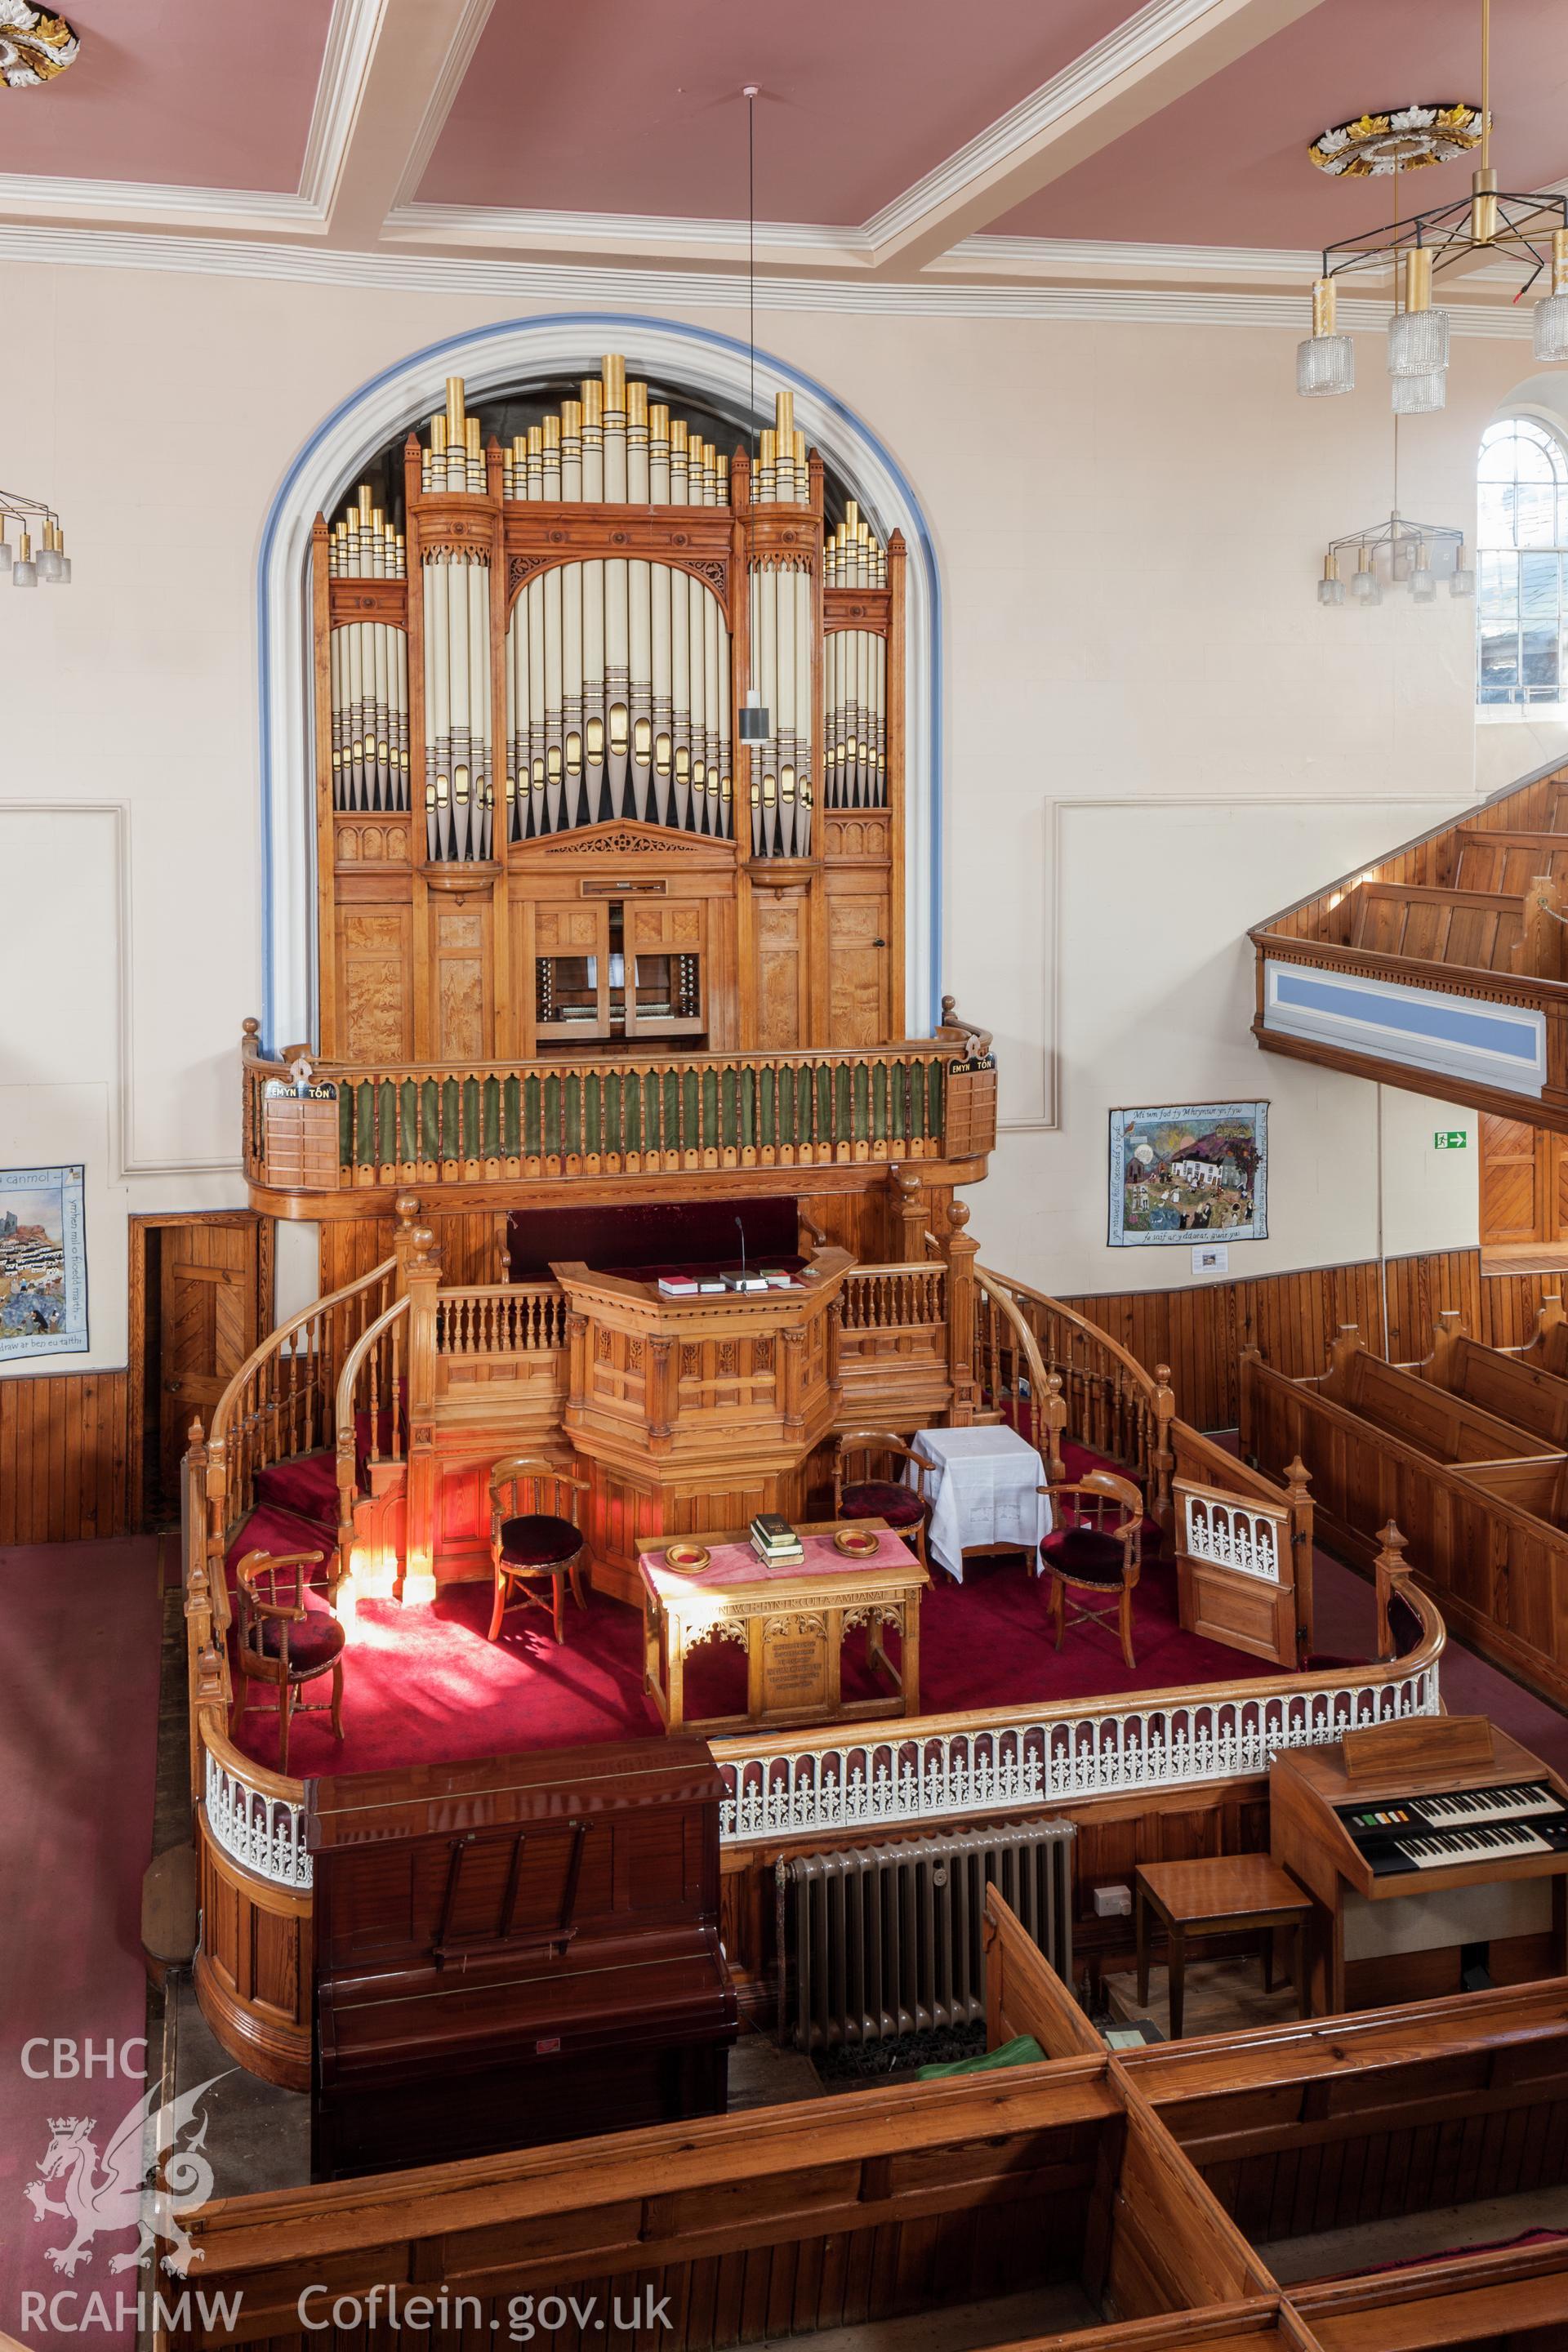 First floor view of the Organ and Sedd fawr